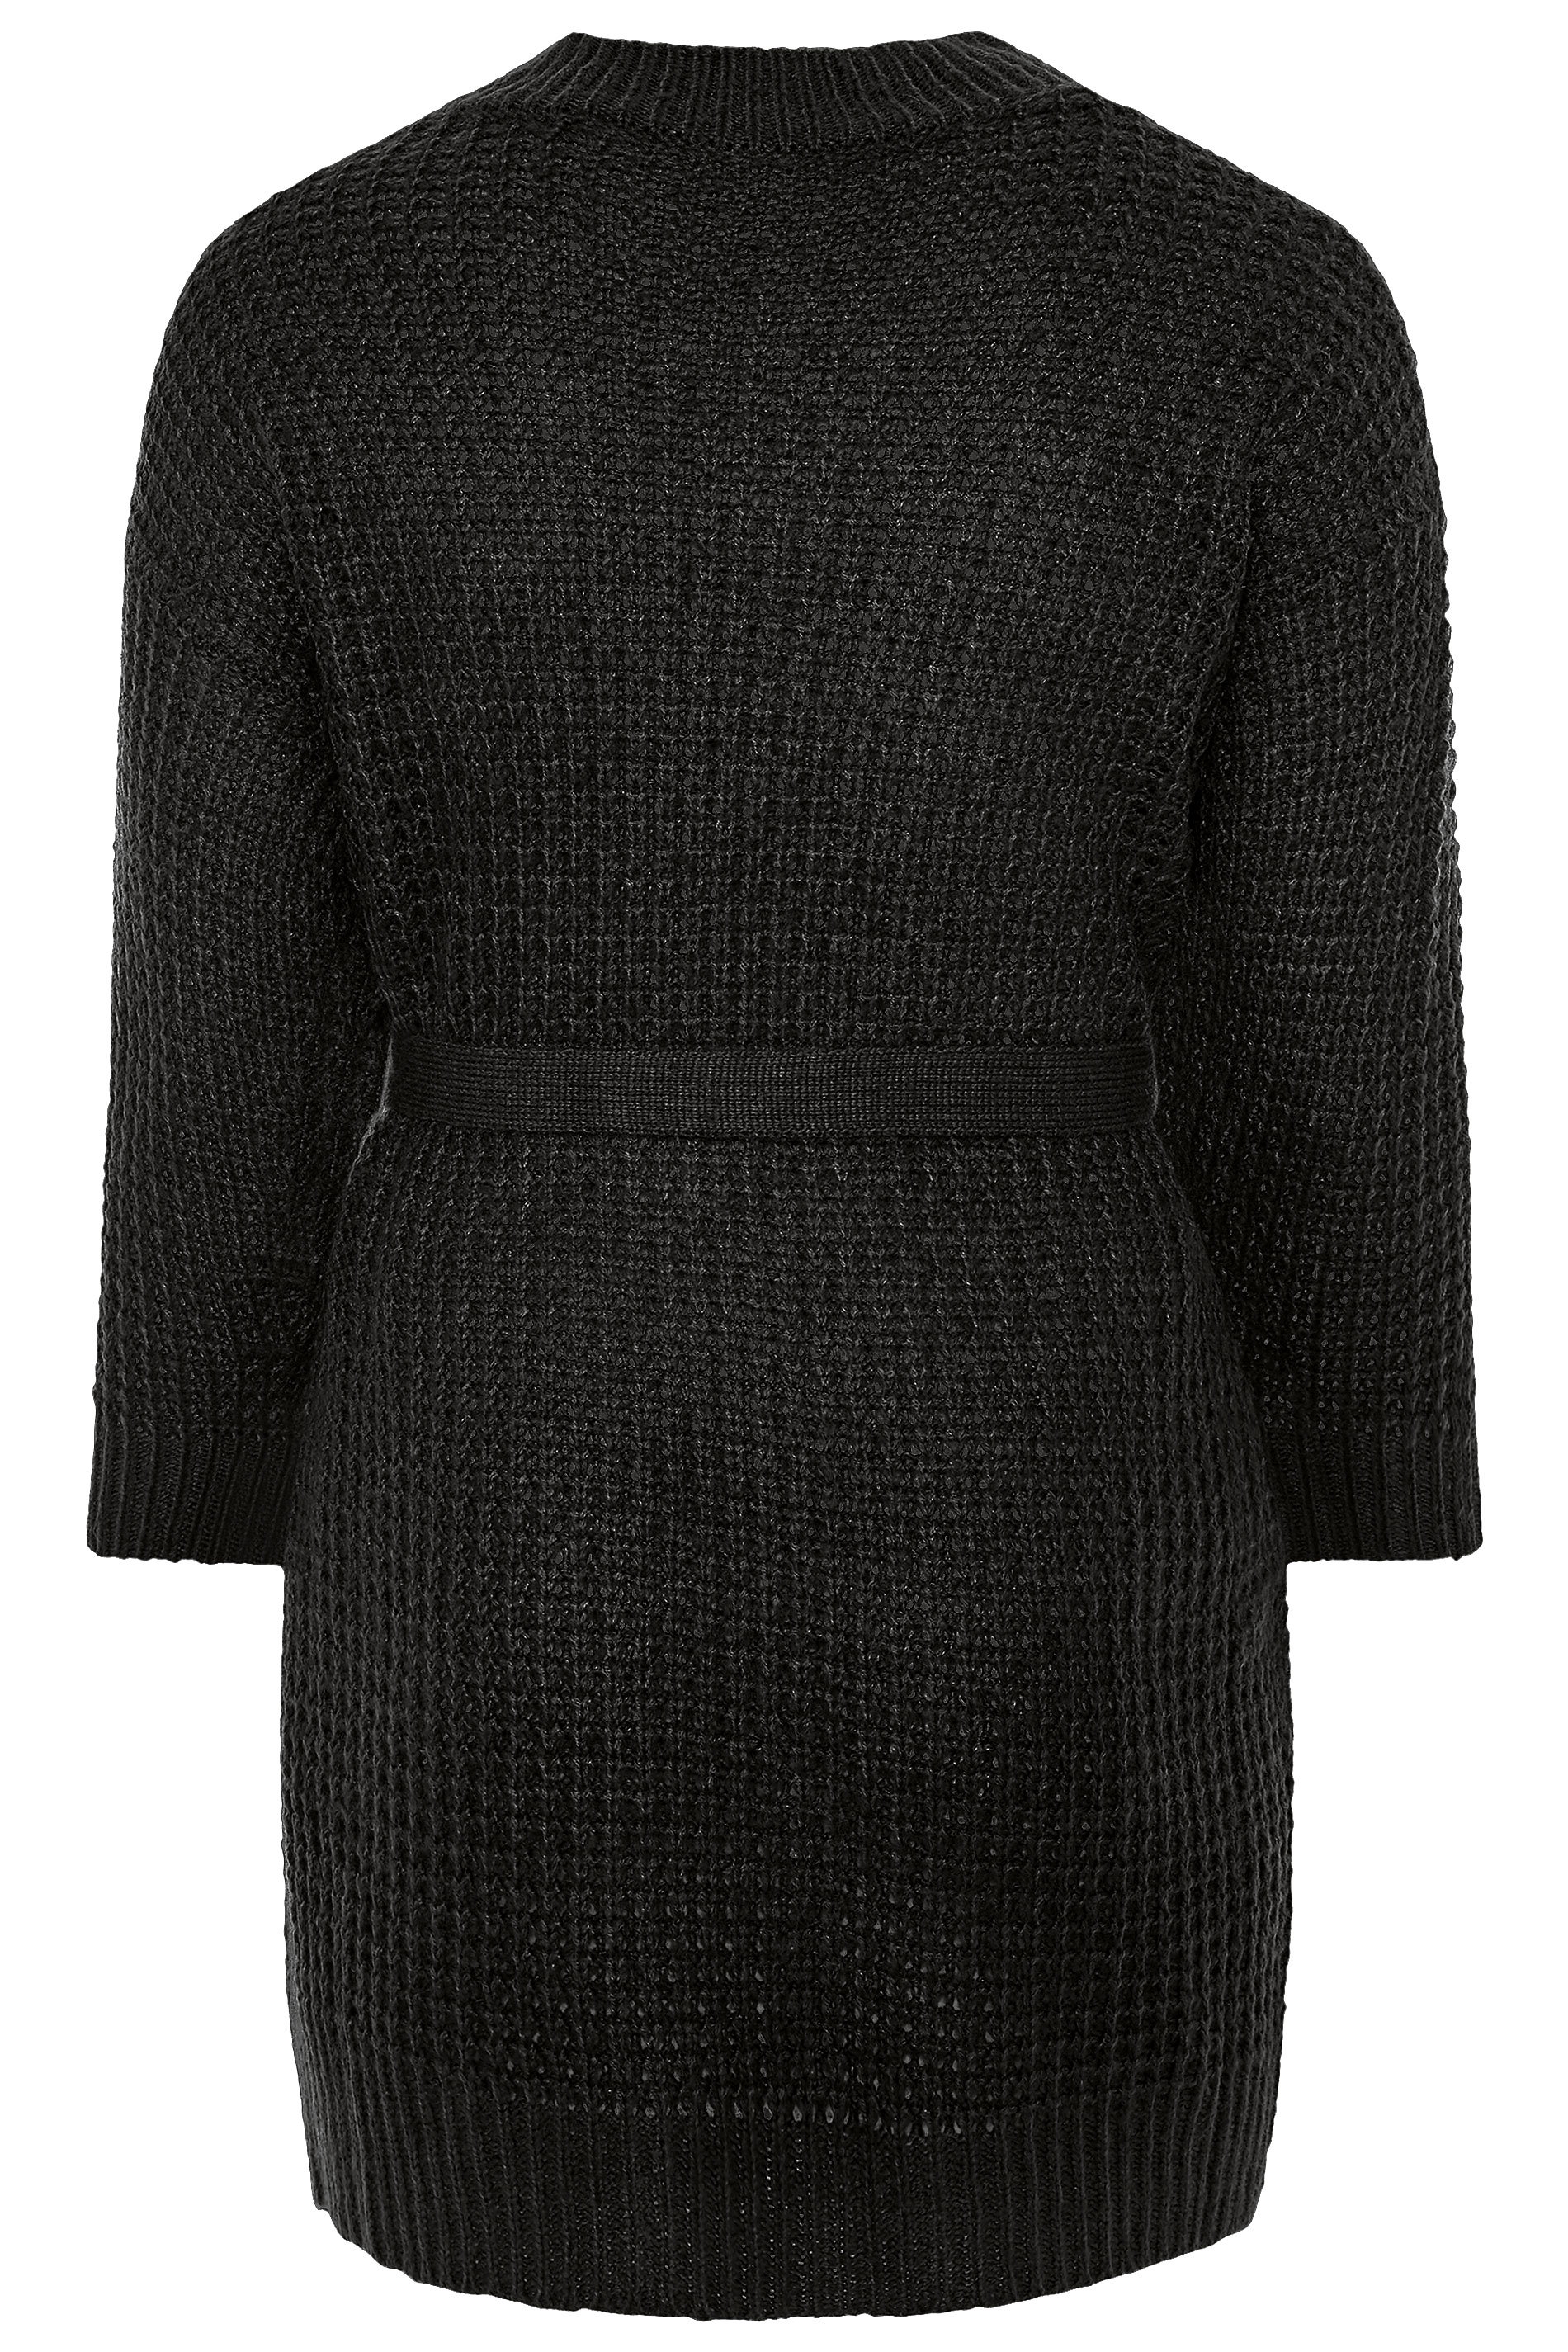 Black Belted Knitted Tunic Jumper | Yours Clothing